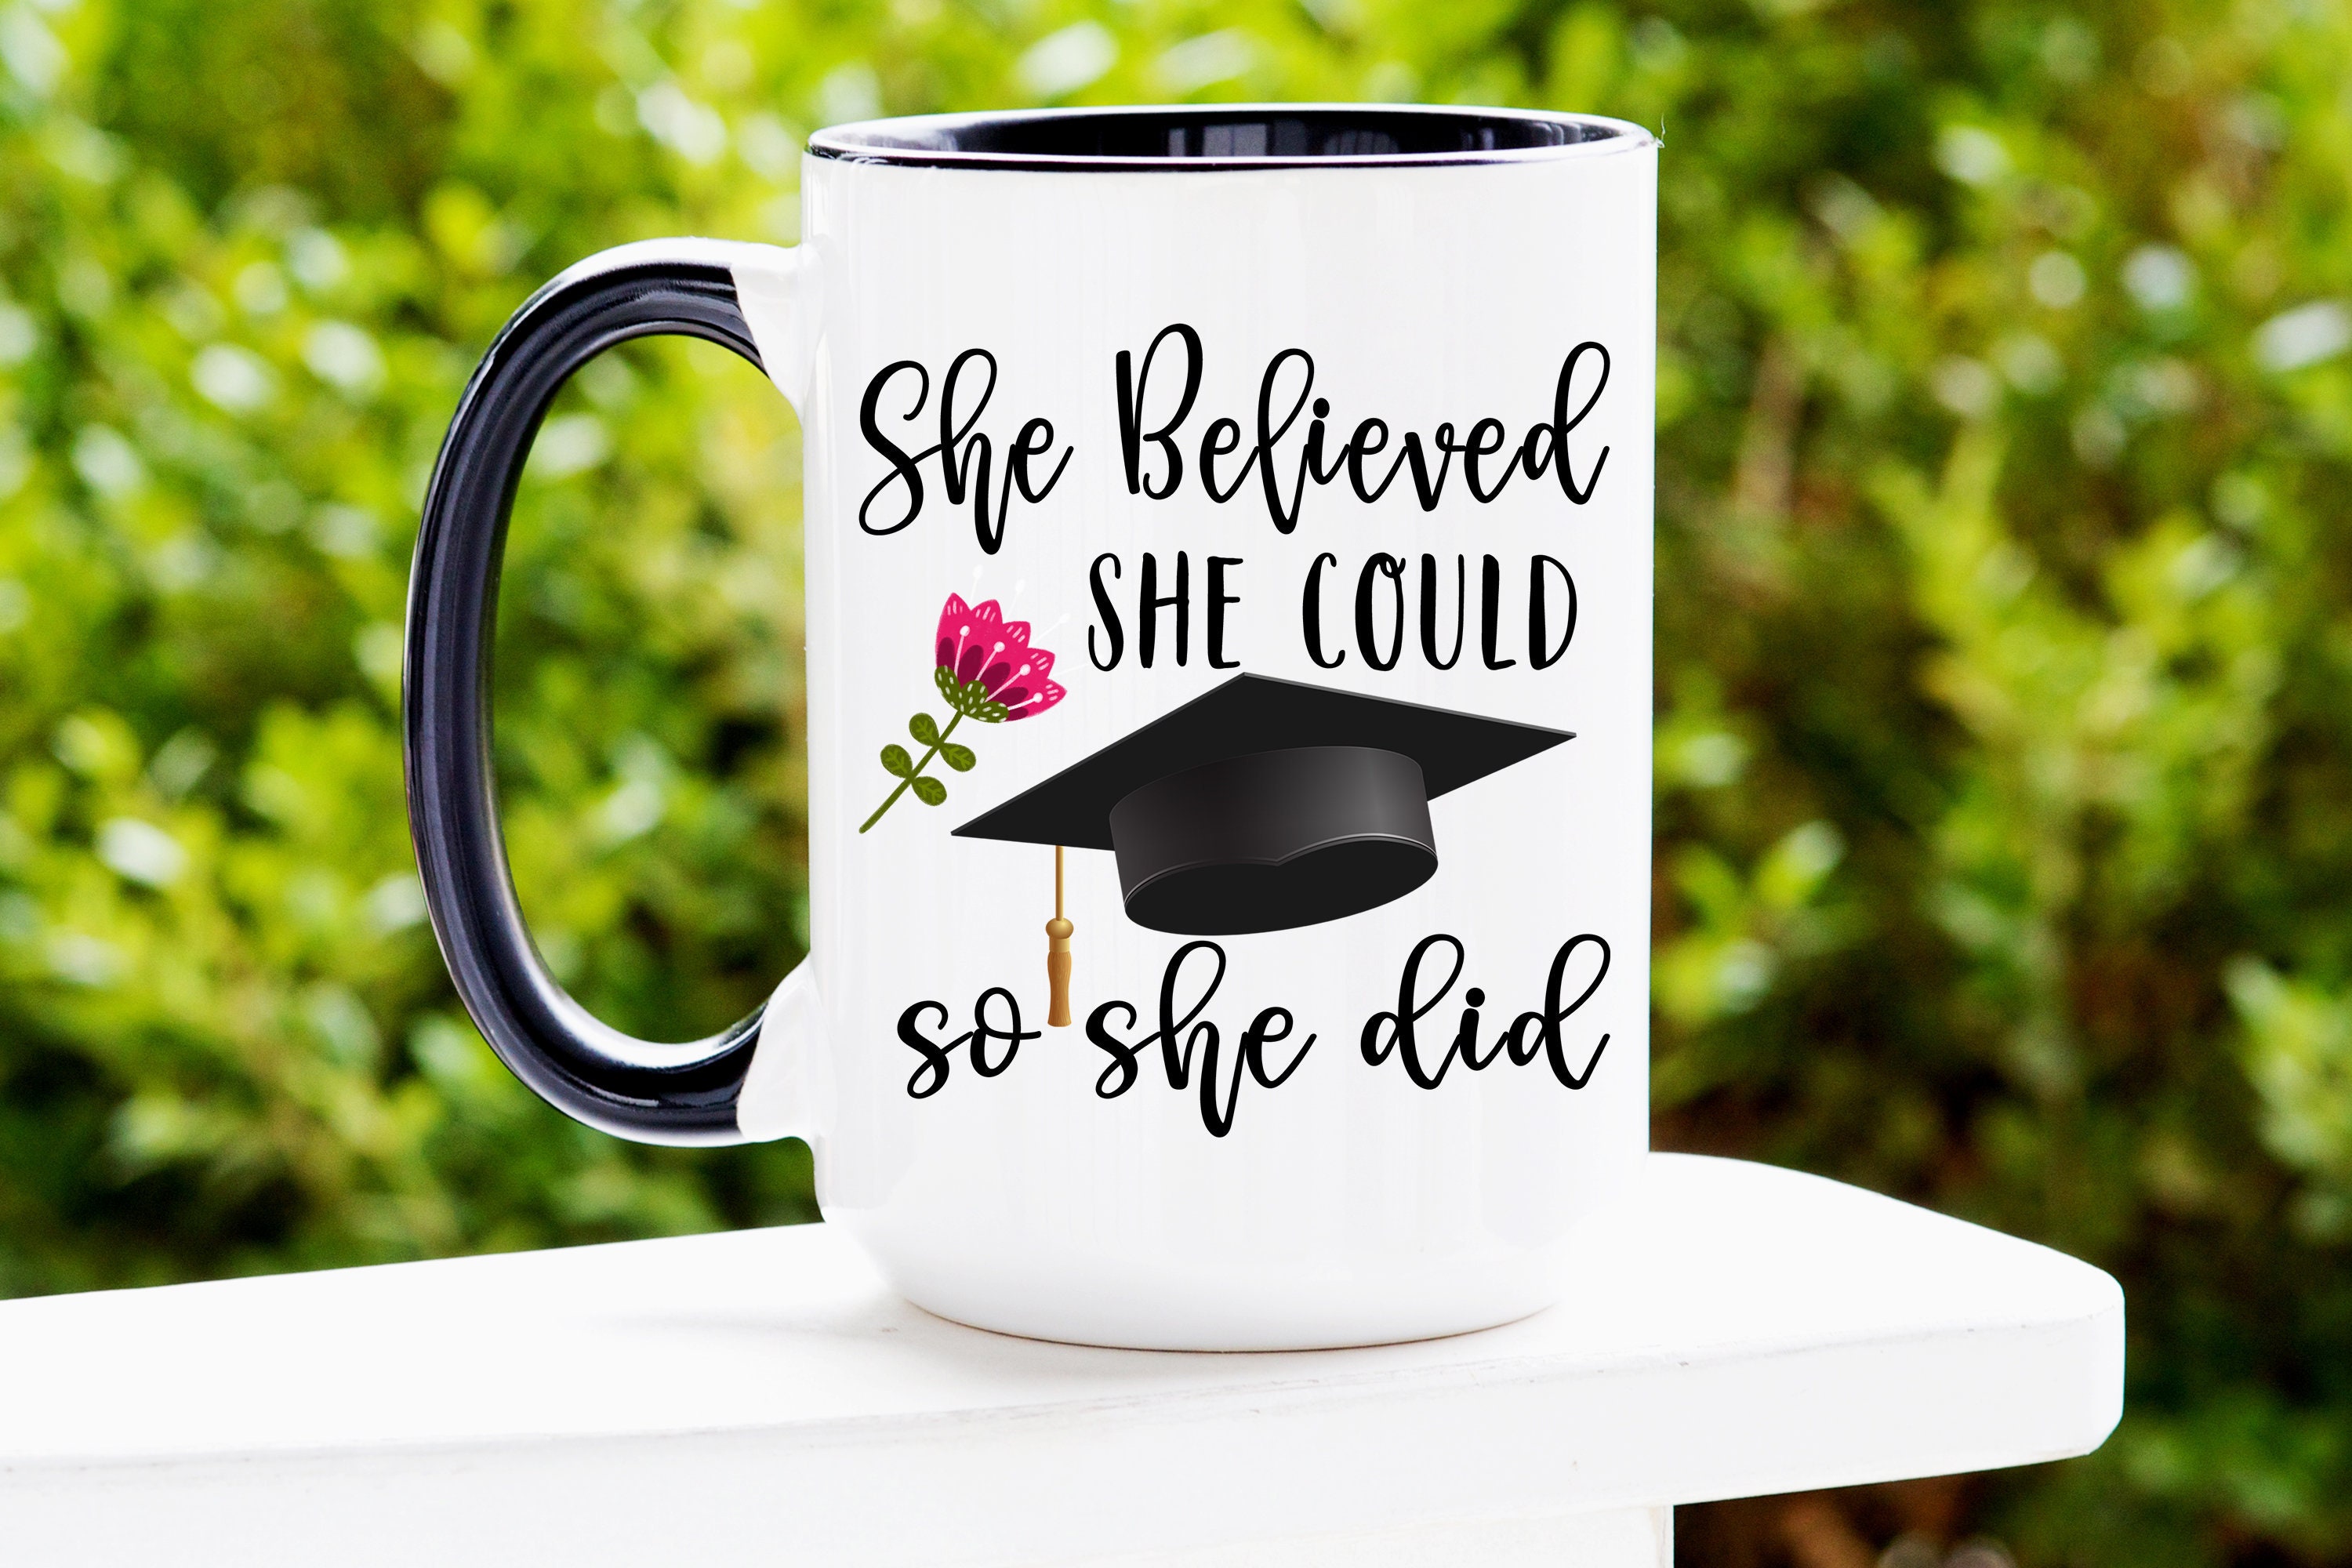 PHD Graduation Gifts PHD Gifts For Women PHD Gifts Phd Etsy.